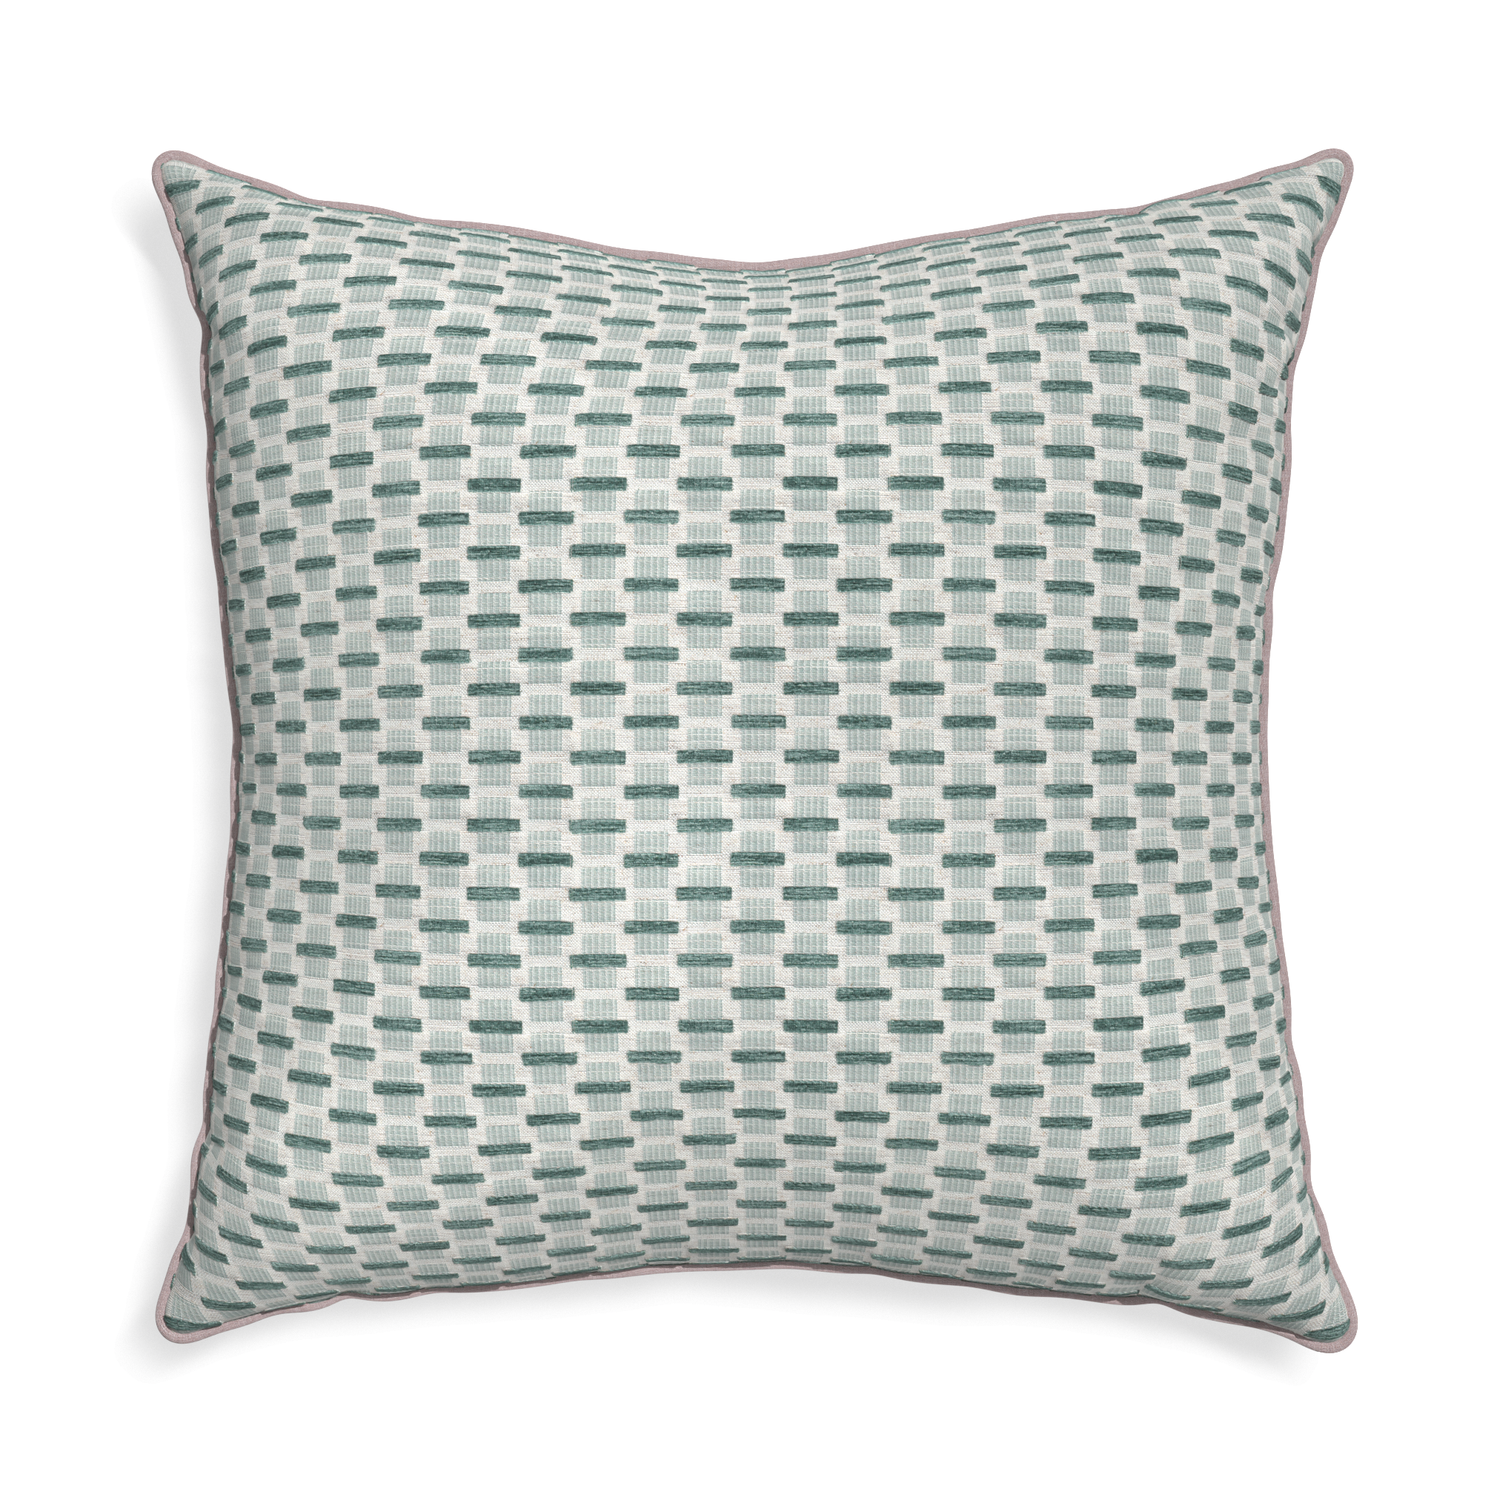 Euro-sham willow mint custom green geometric chenillepillow with orchid piping on white background